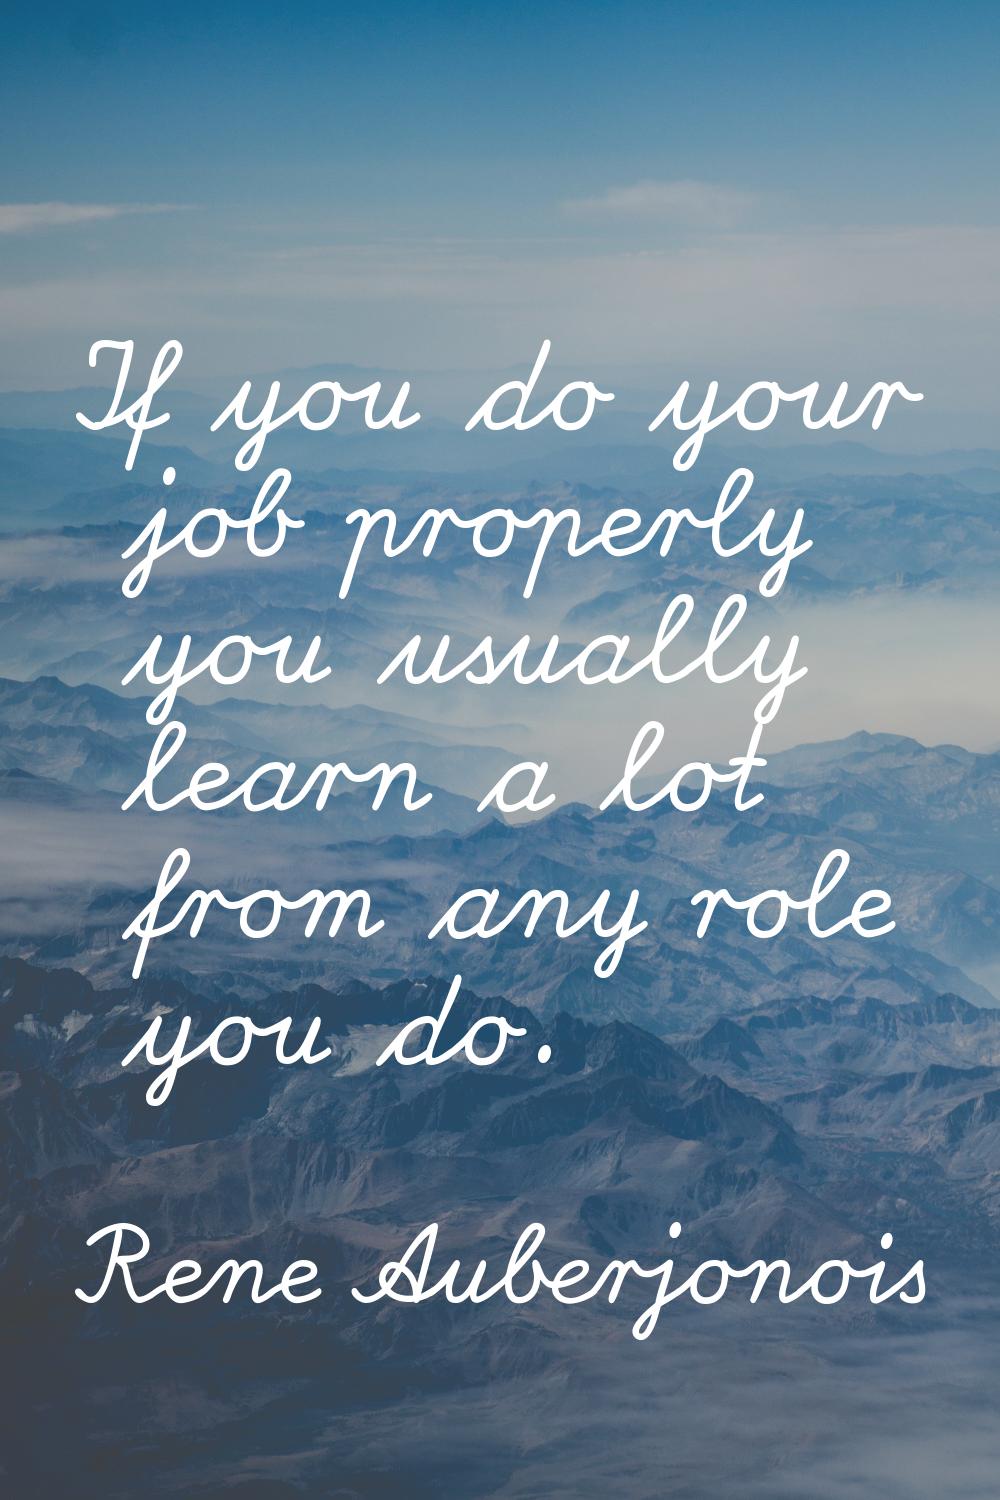 If you do your job properly you usually learn a lot from any role you do.